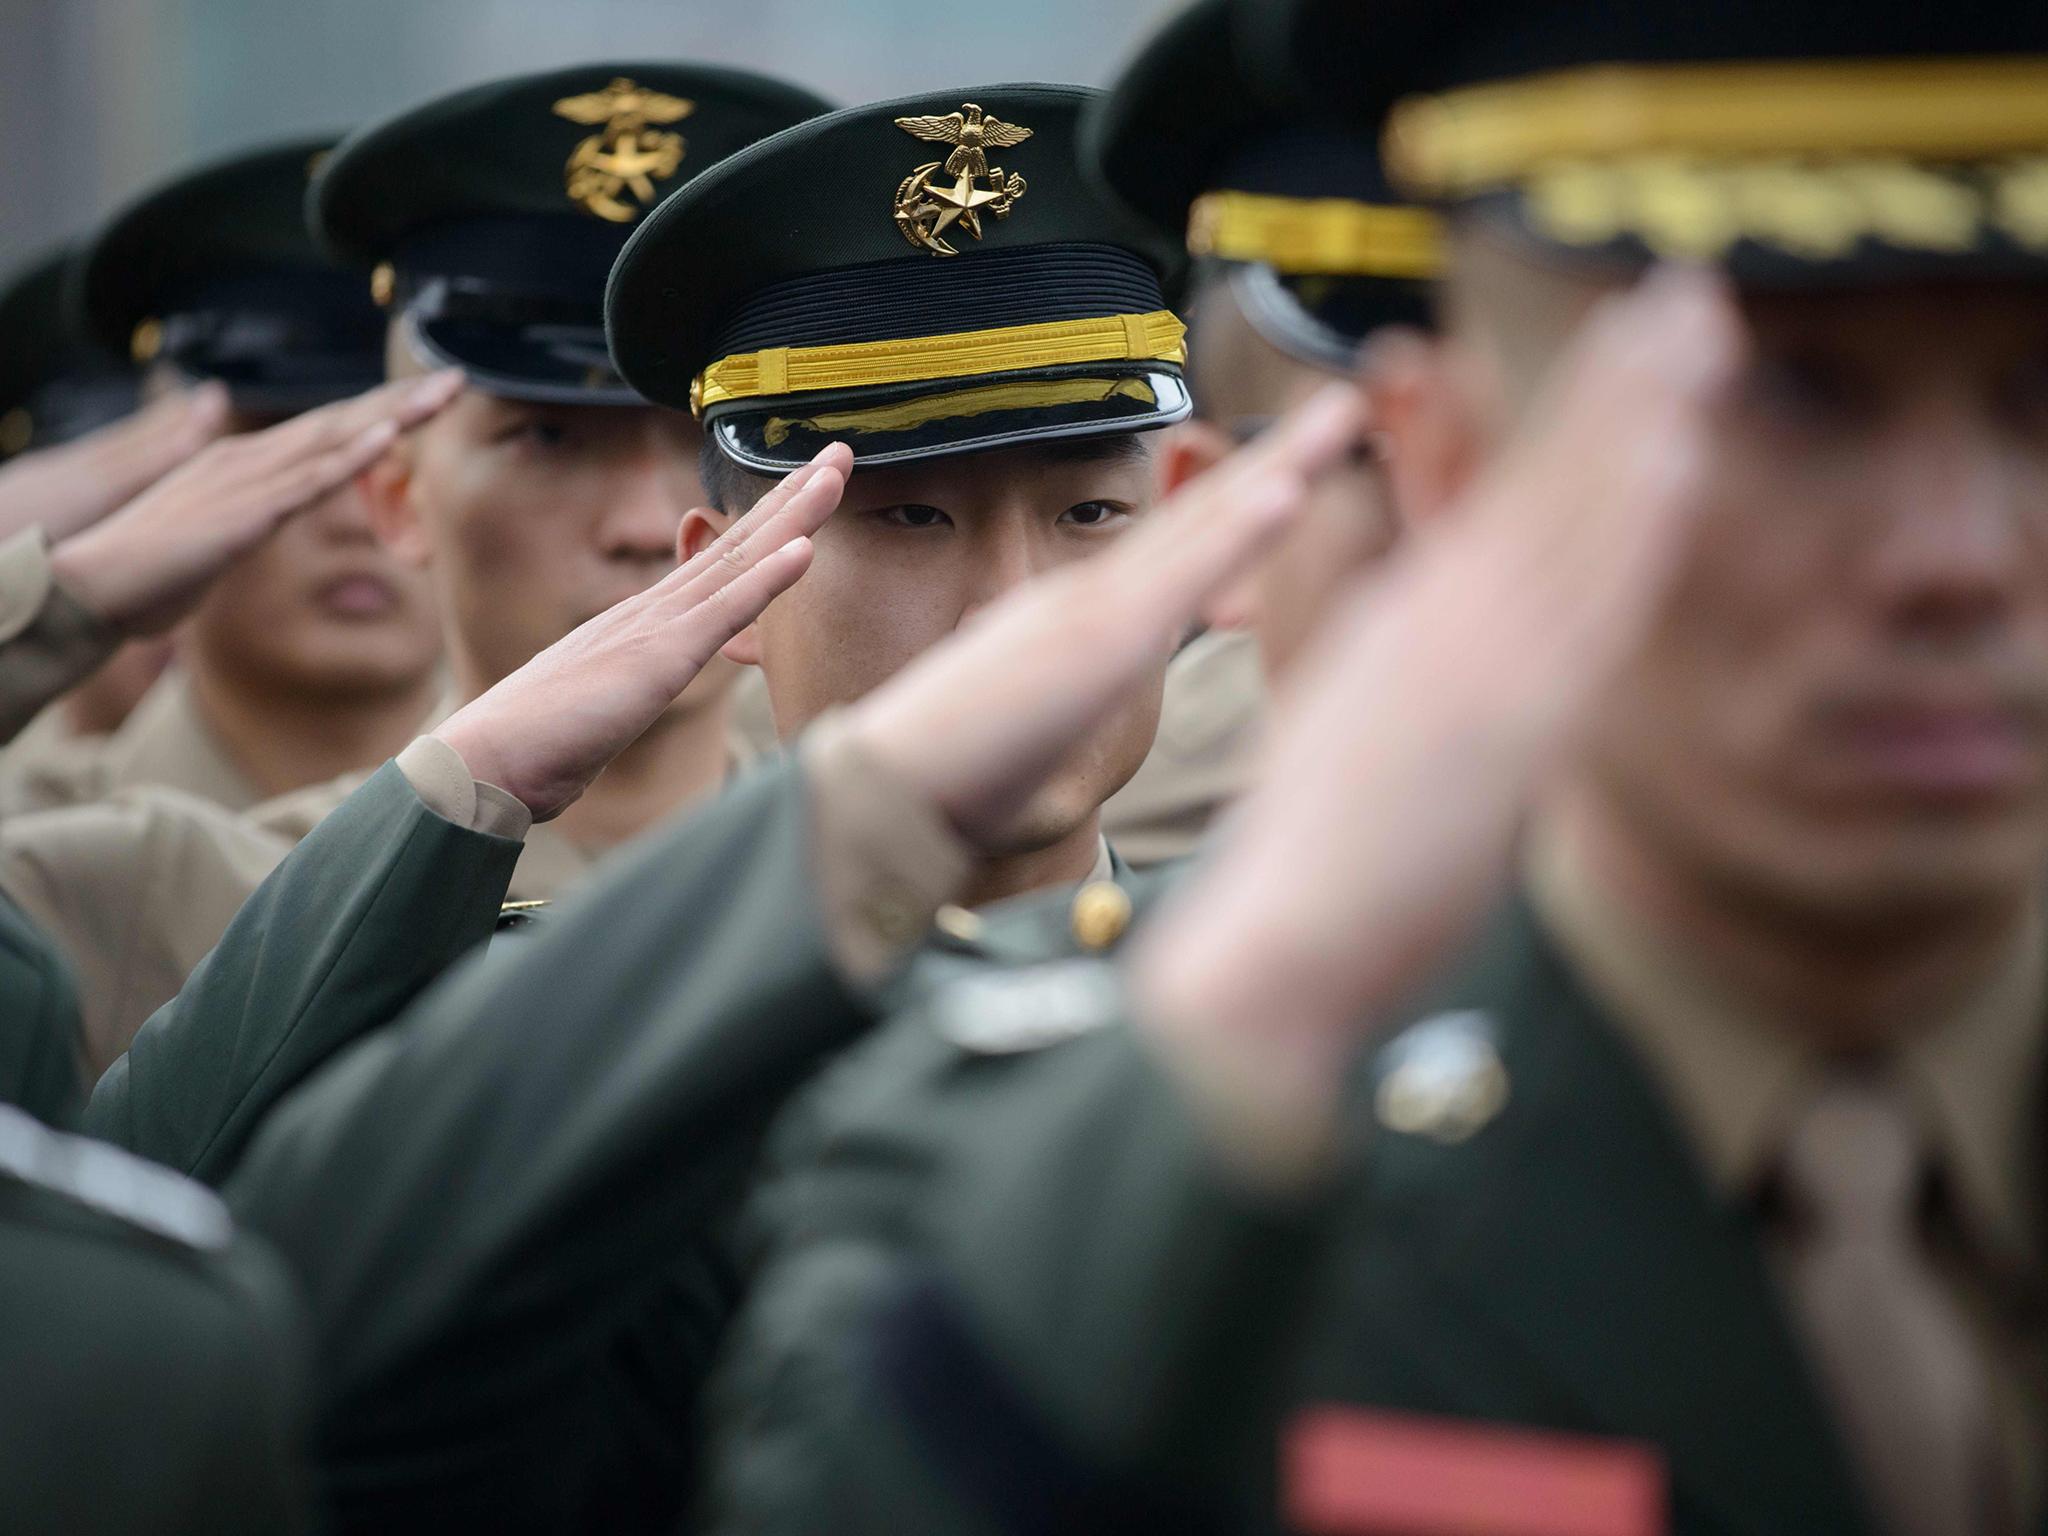 South Korea's military bars transgender people from enlisting but has no rules in place for those who transition while serving